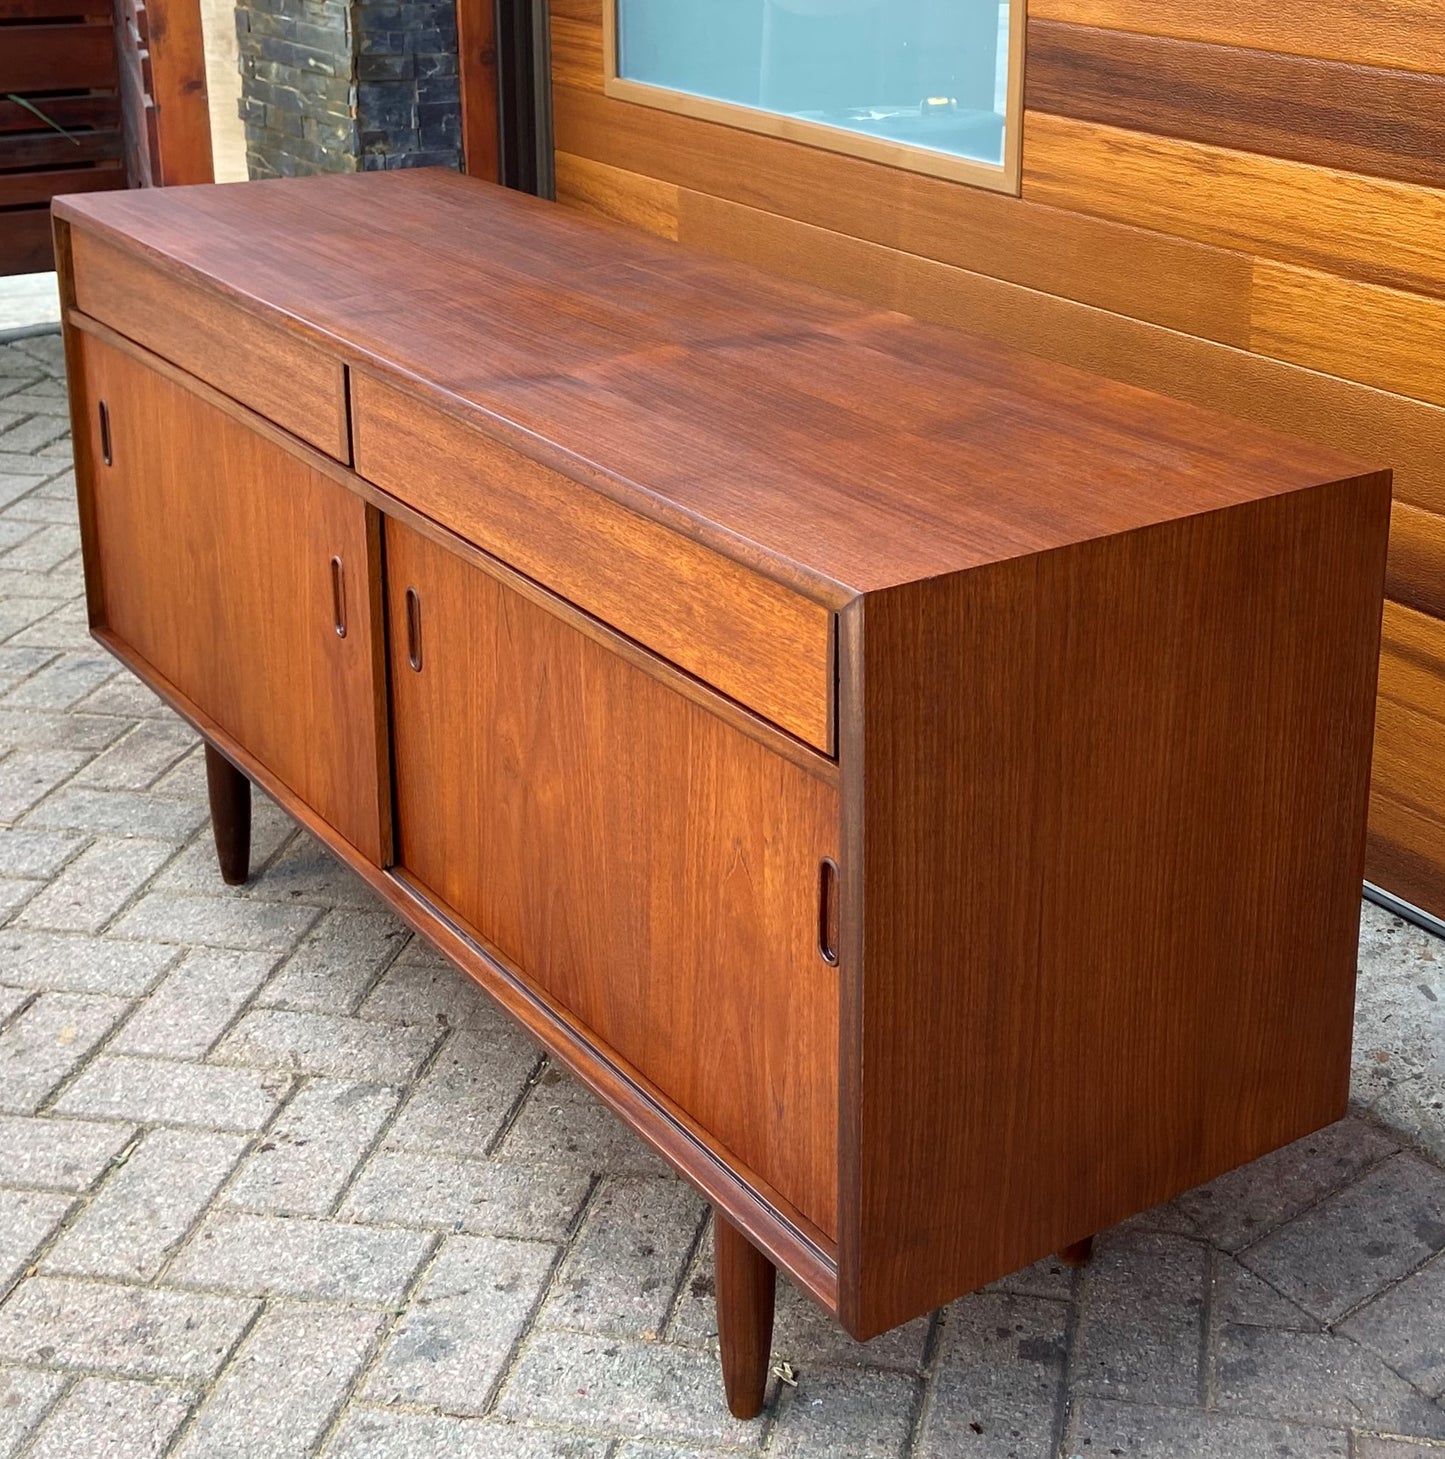 REFINISHED Mid Century Modern Teak Sideboard by Punch Design 60"